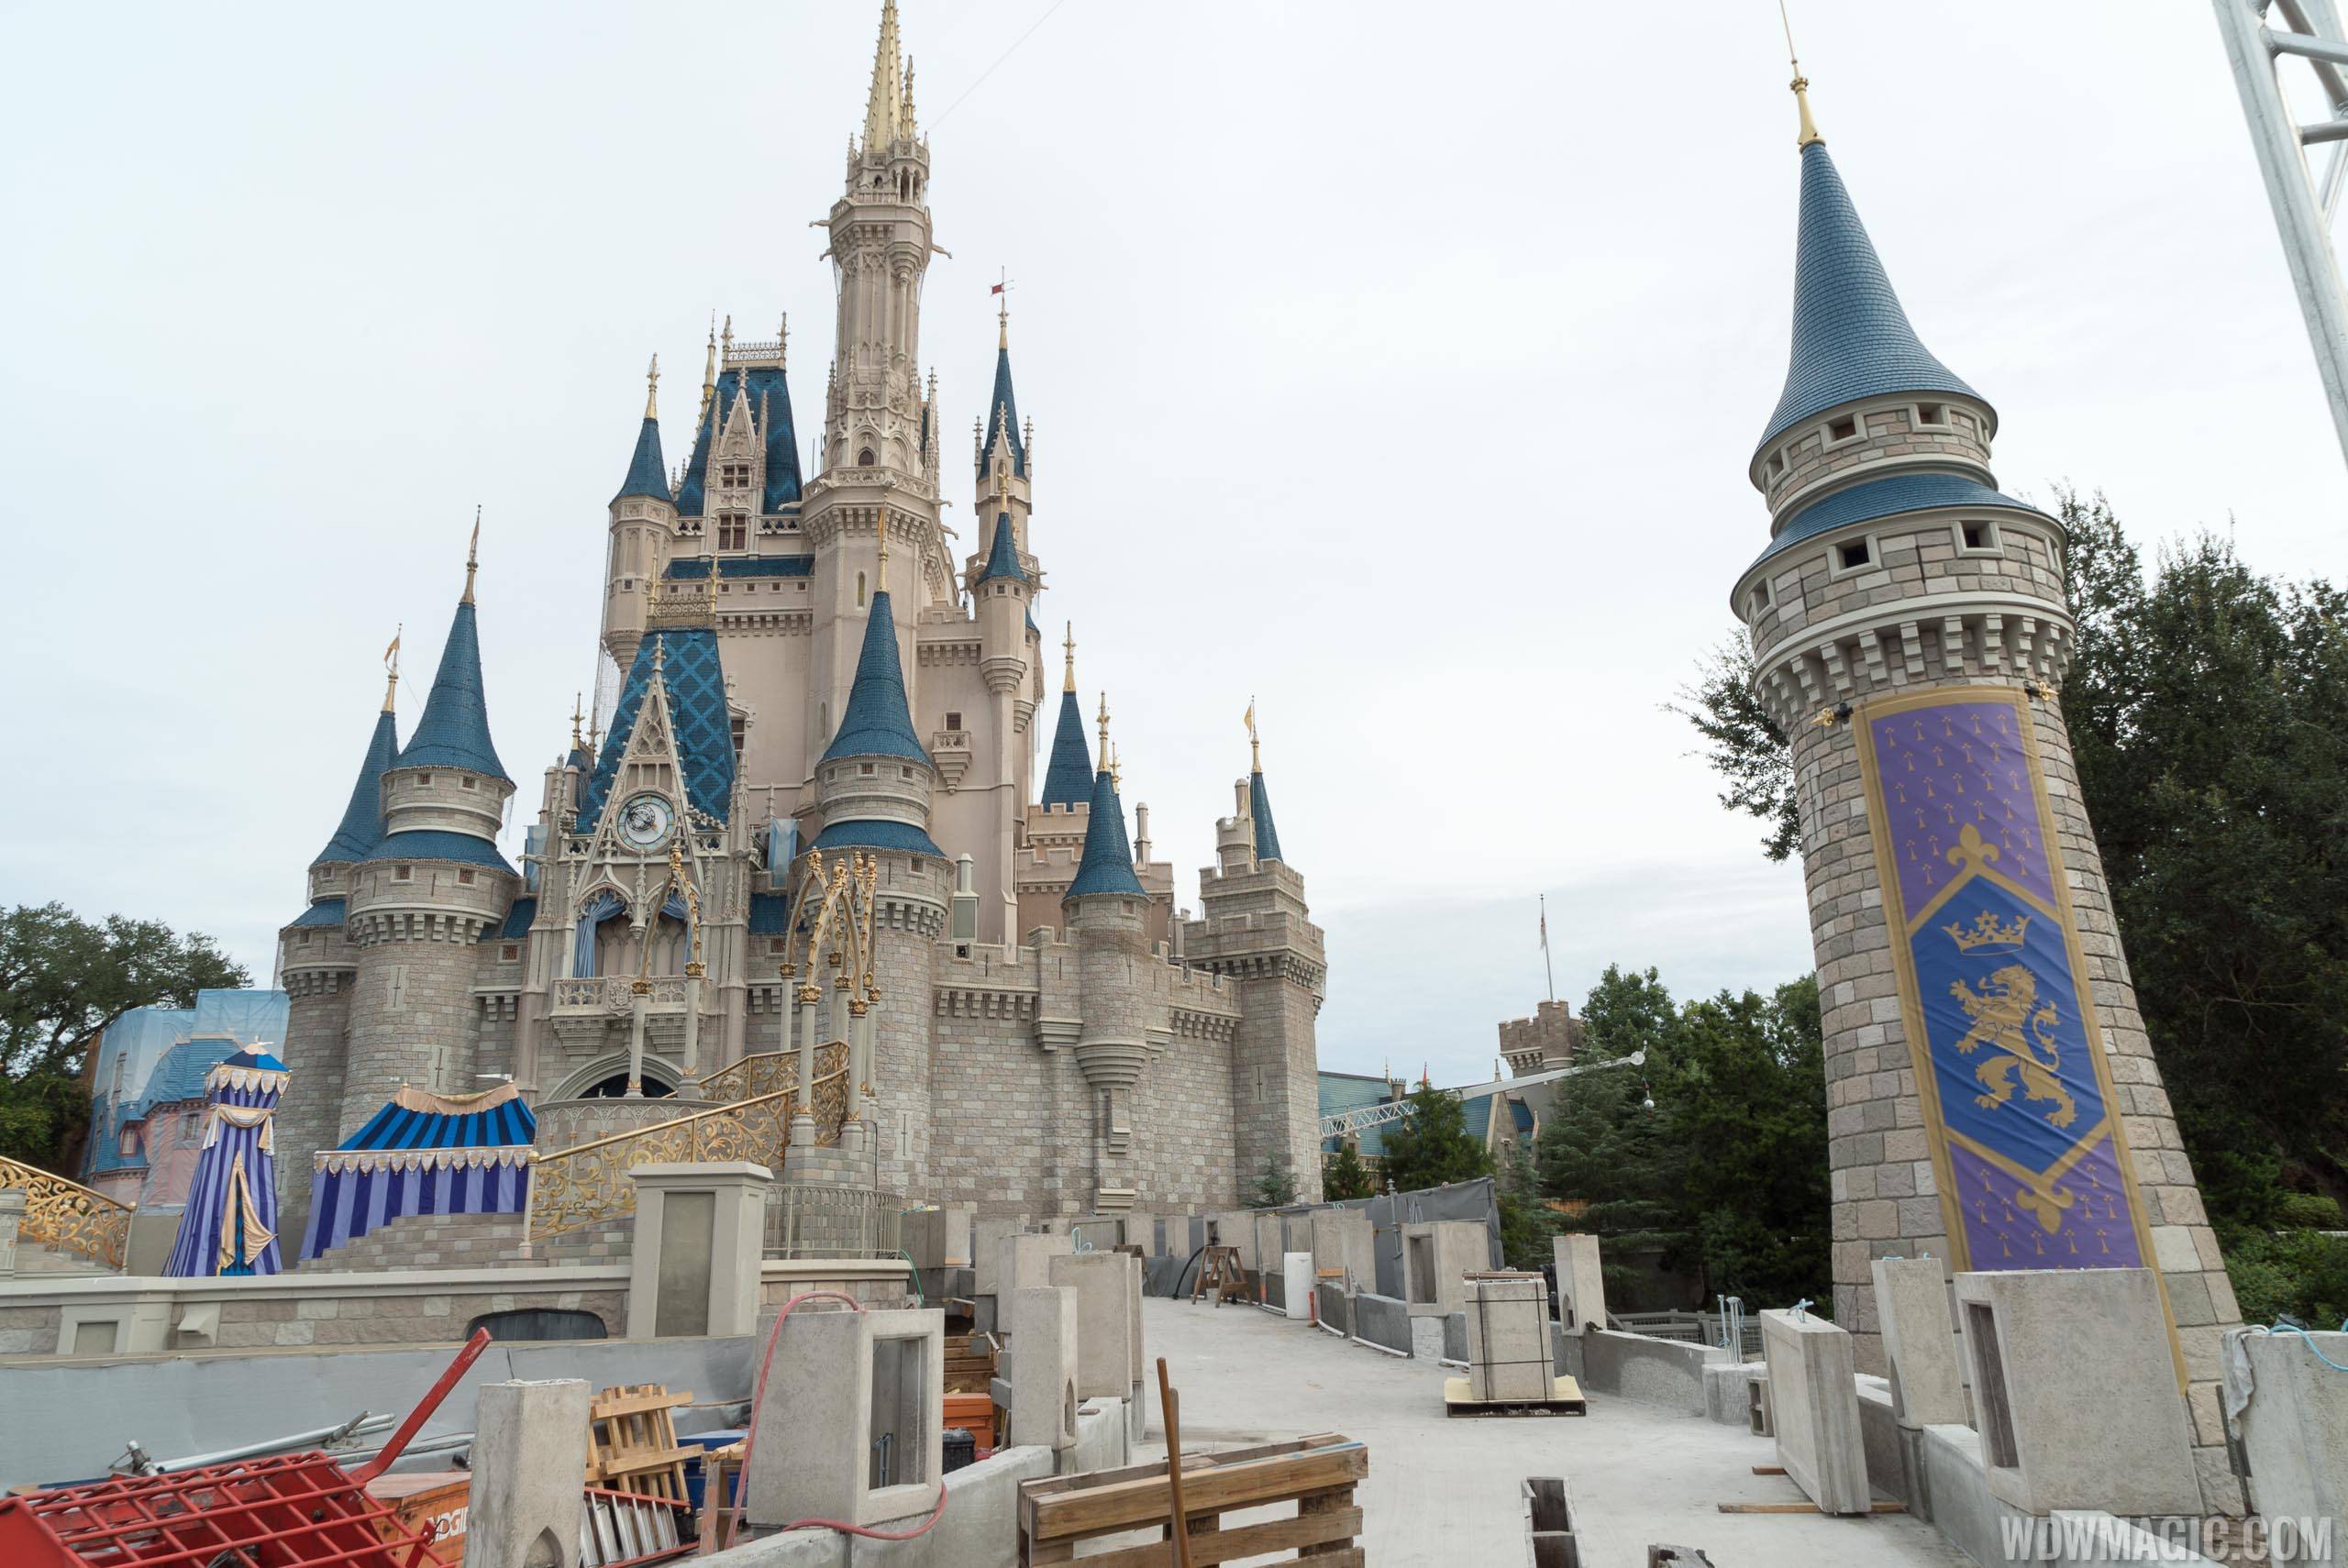 PHOTOS - Updated look at the Cinderella Castle forecourt construction